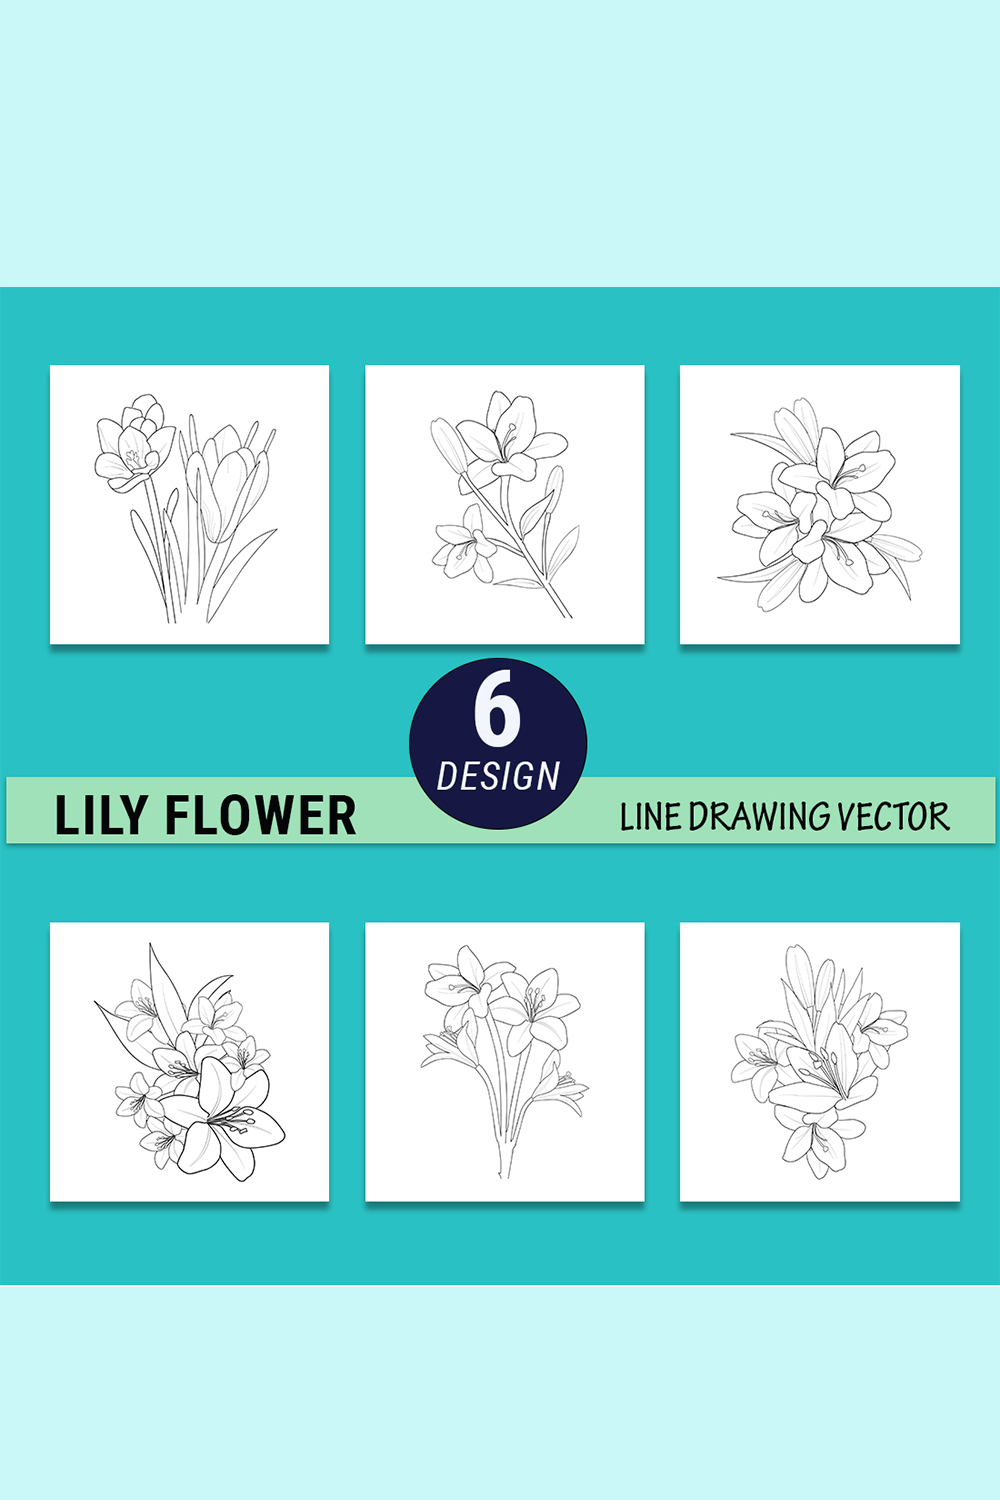 lily flower pencil art, lily flower outline drawing, lily flower pattern designs, pencil drawing lilys, simple lily flower drawing for kids pinterest preview image.